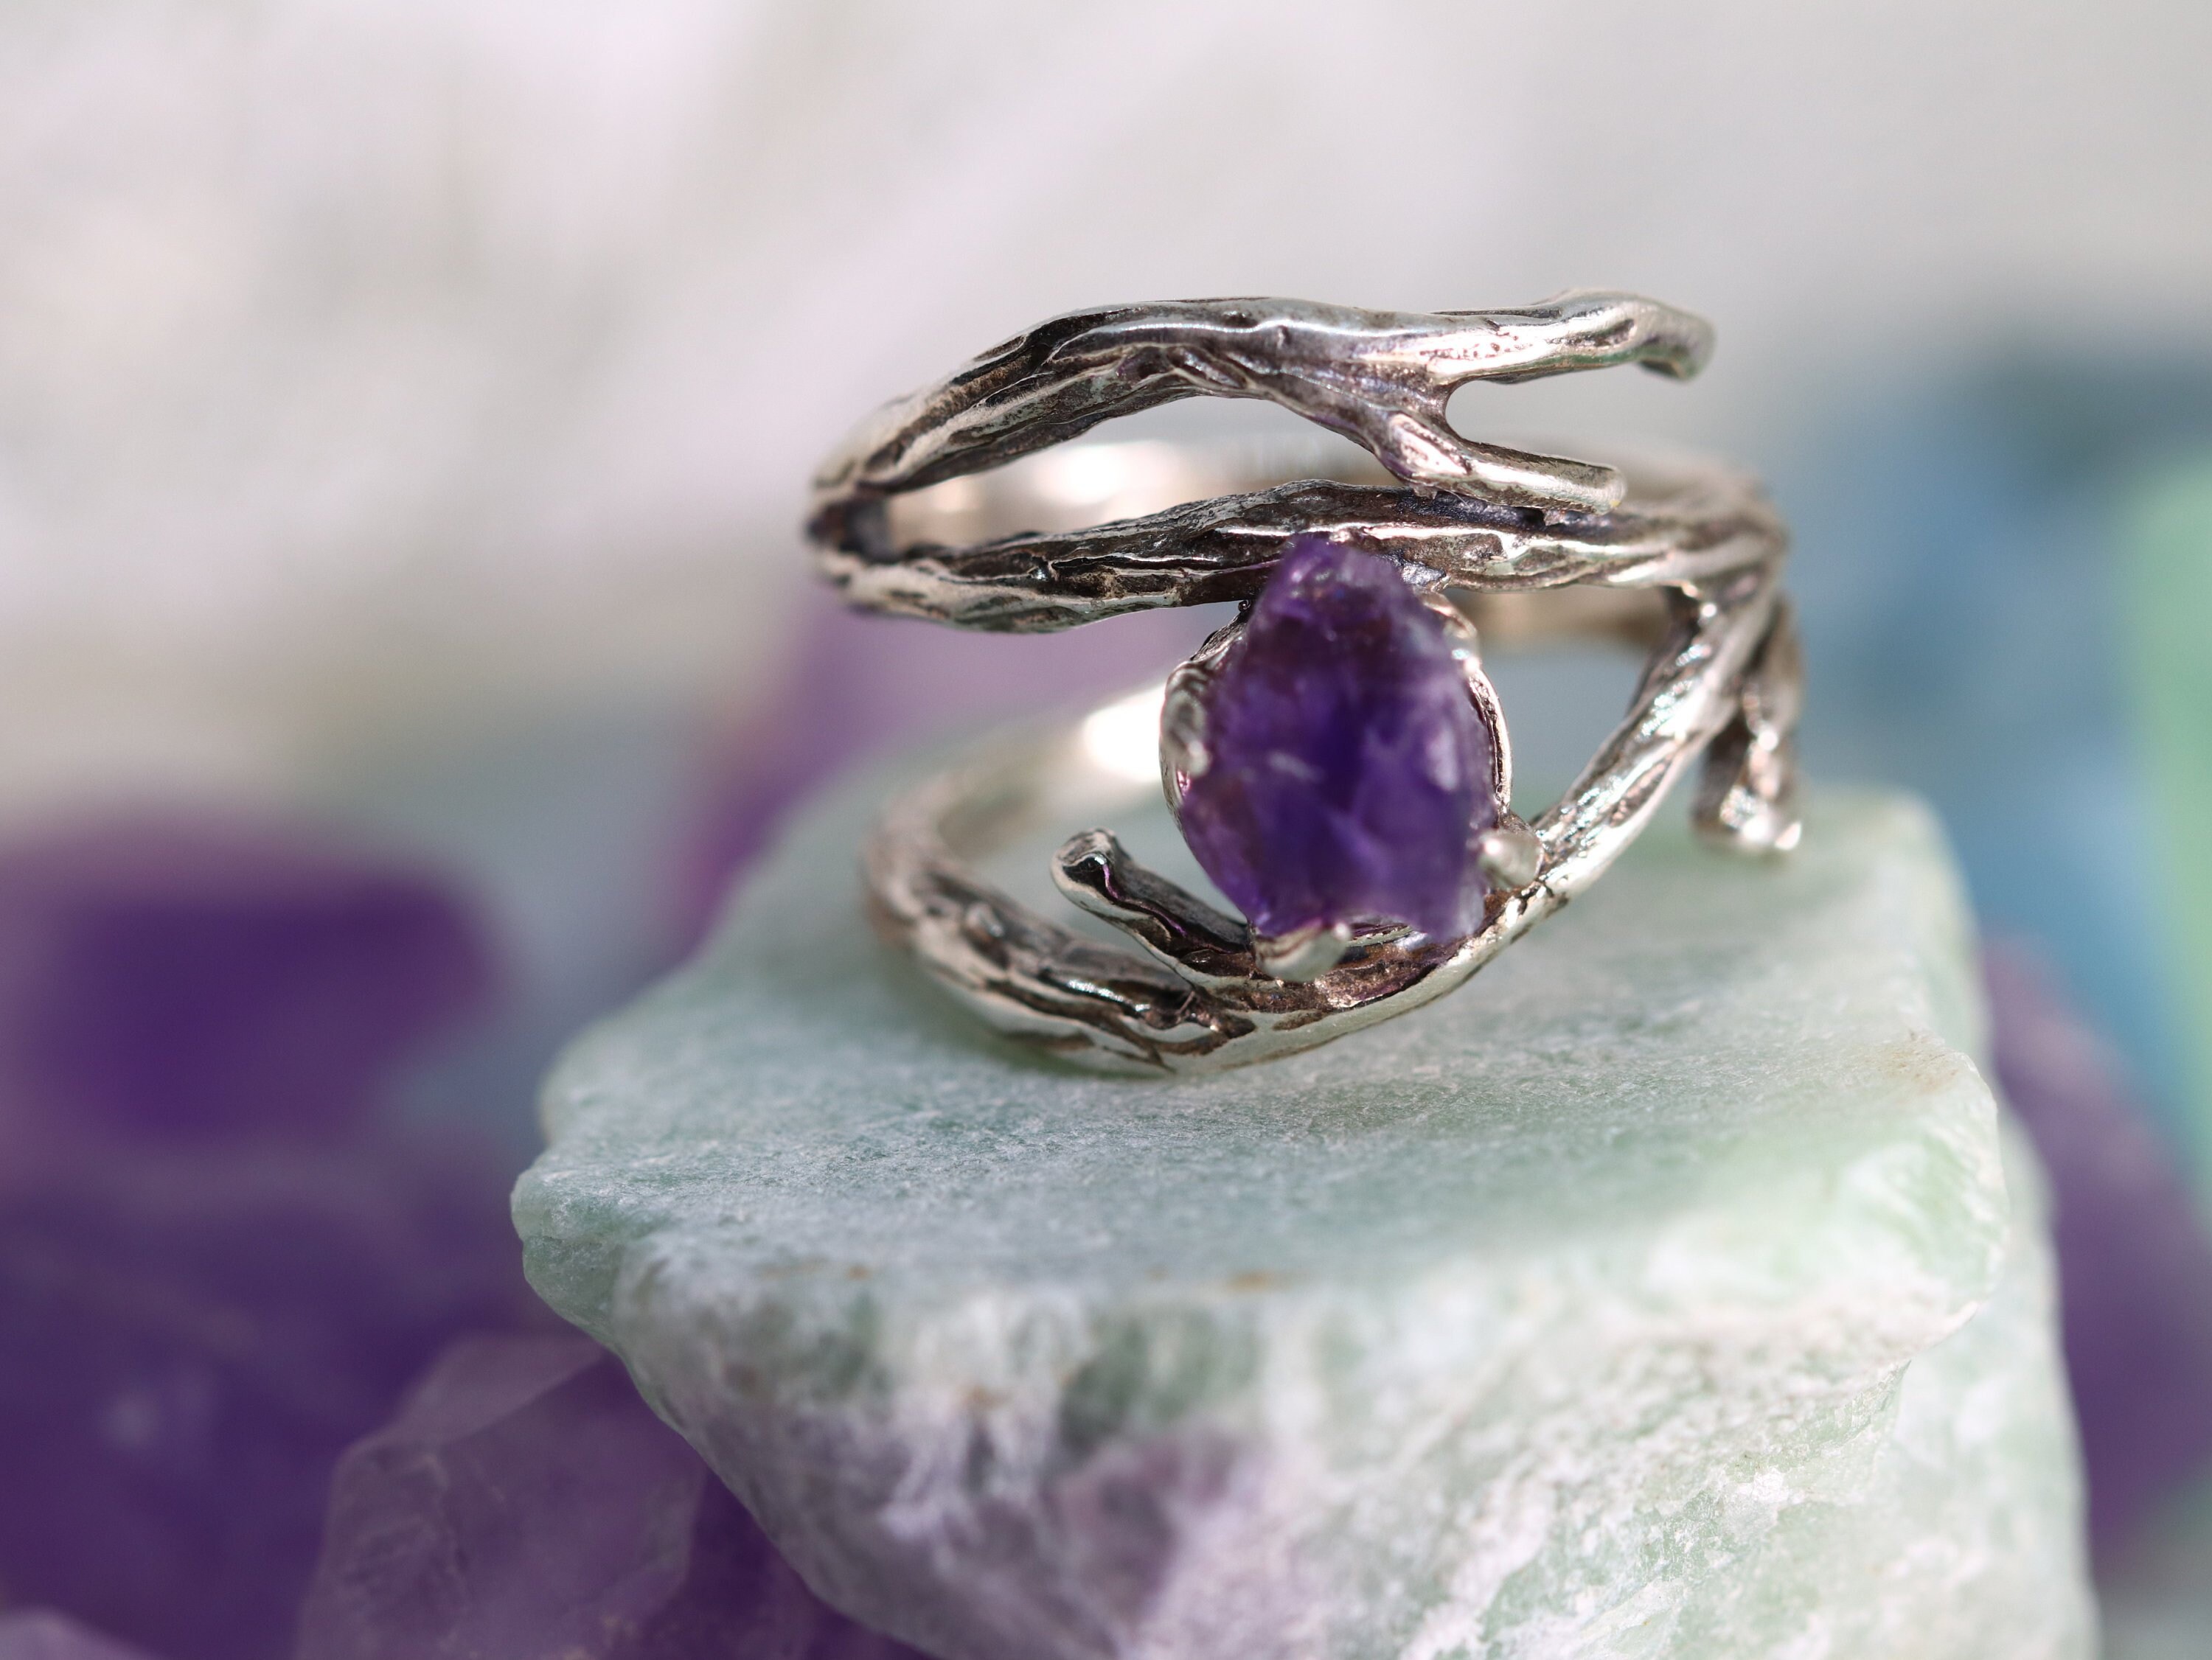 Beautiful natural amethyst gemstone 925 sterling silver ring gift for her.